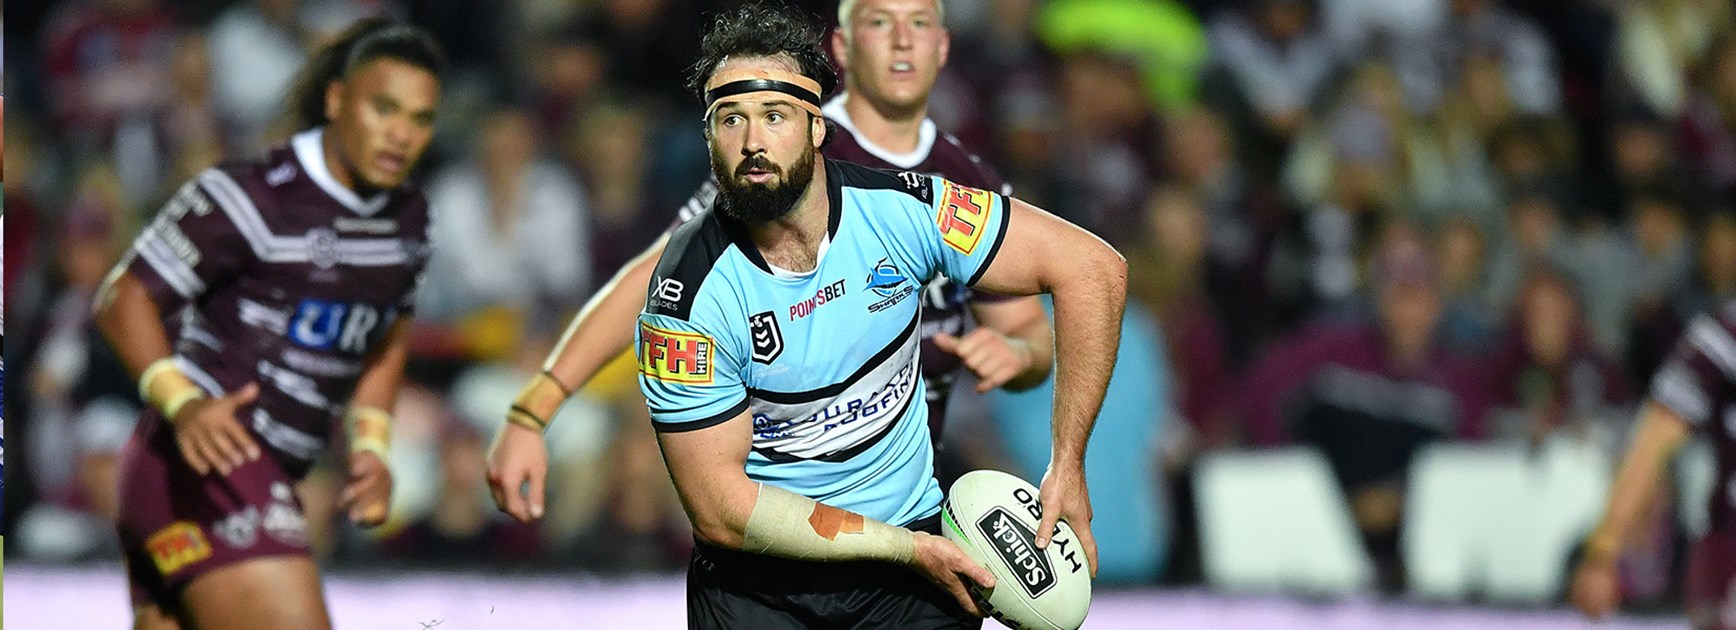 Sharks to continue the 'Fight for Fine' at Manly trial